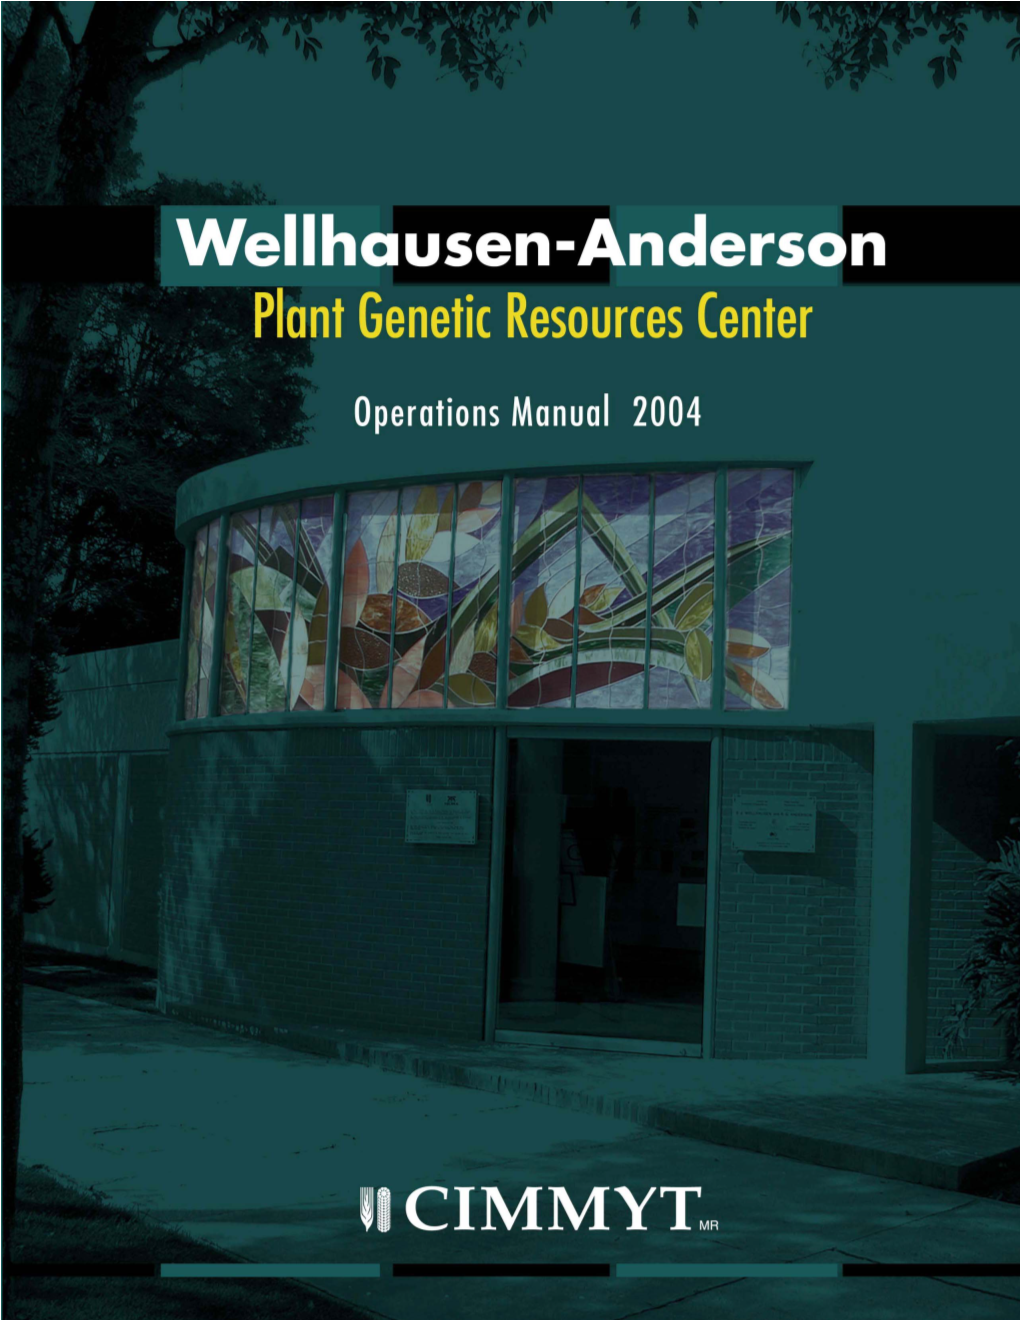 Wellhausen-Anderson Plant Genetic Resources Center